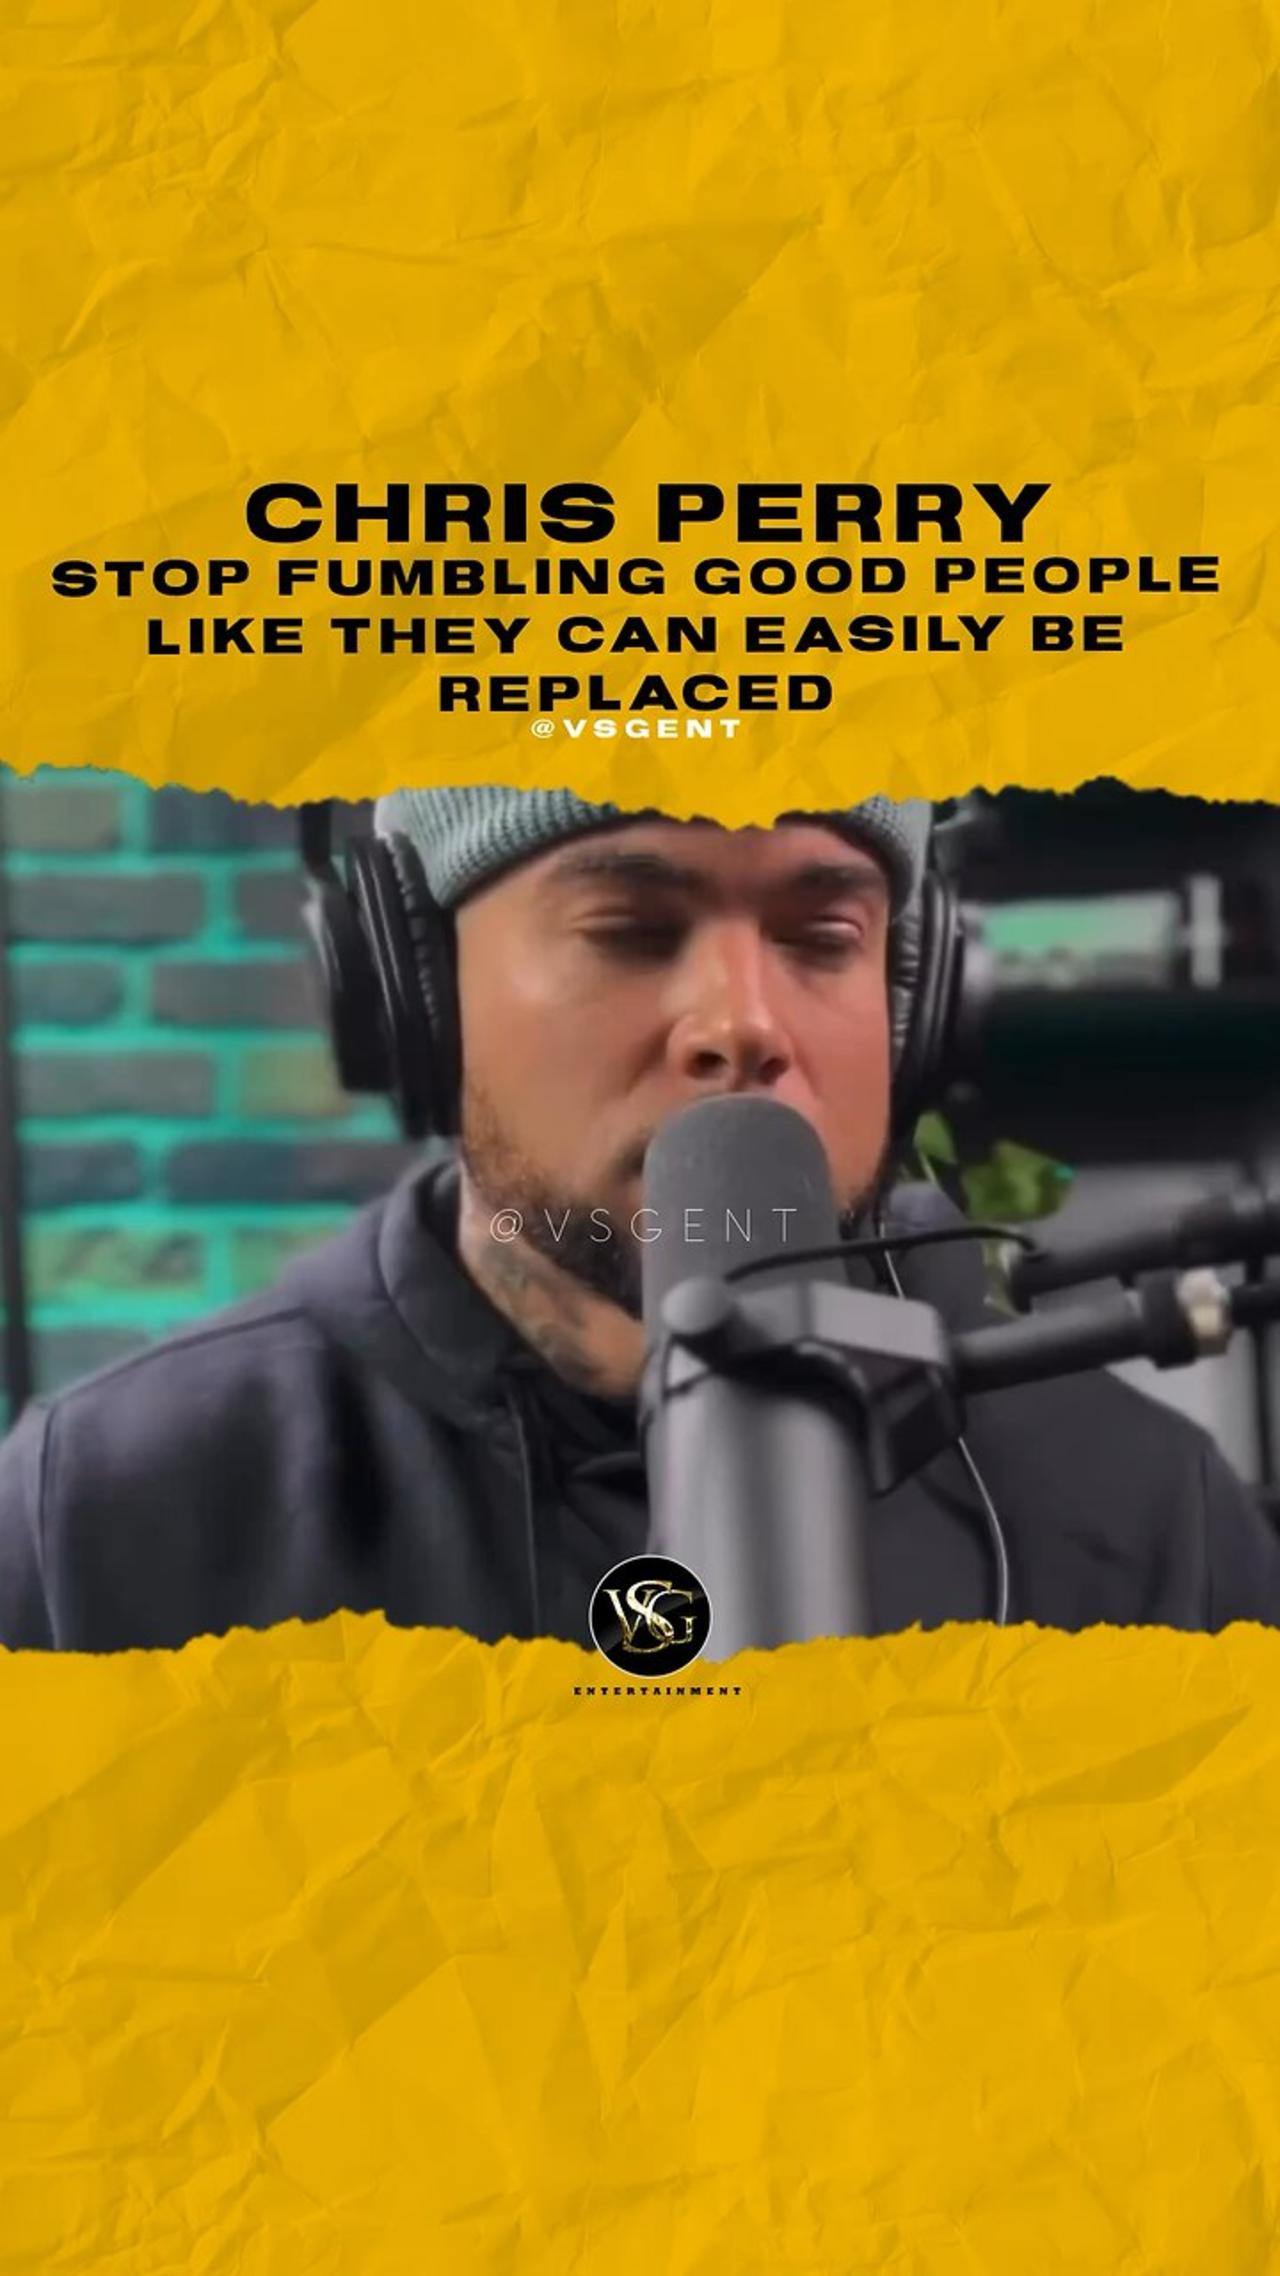 #chrisperry Stop fumbling good people like they can be easily replaced